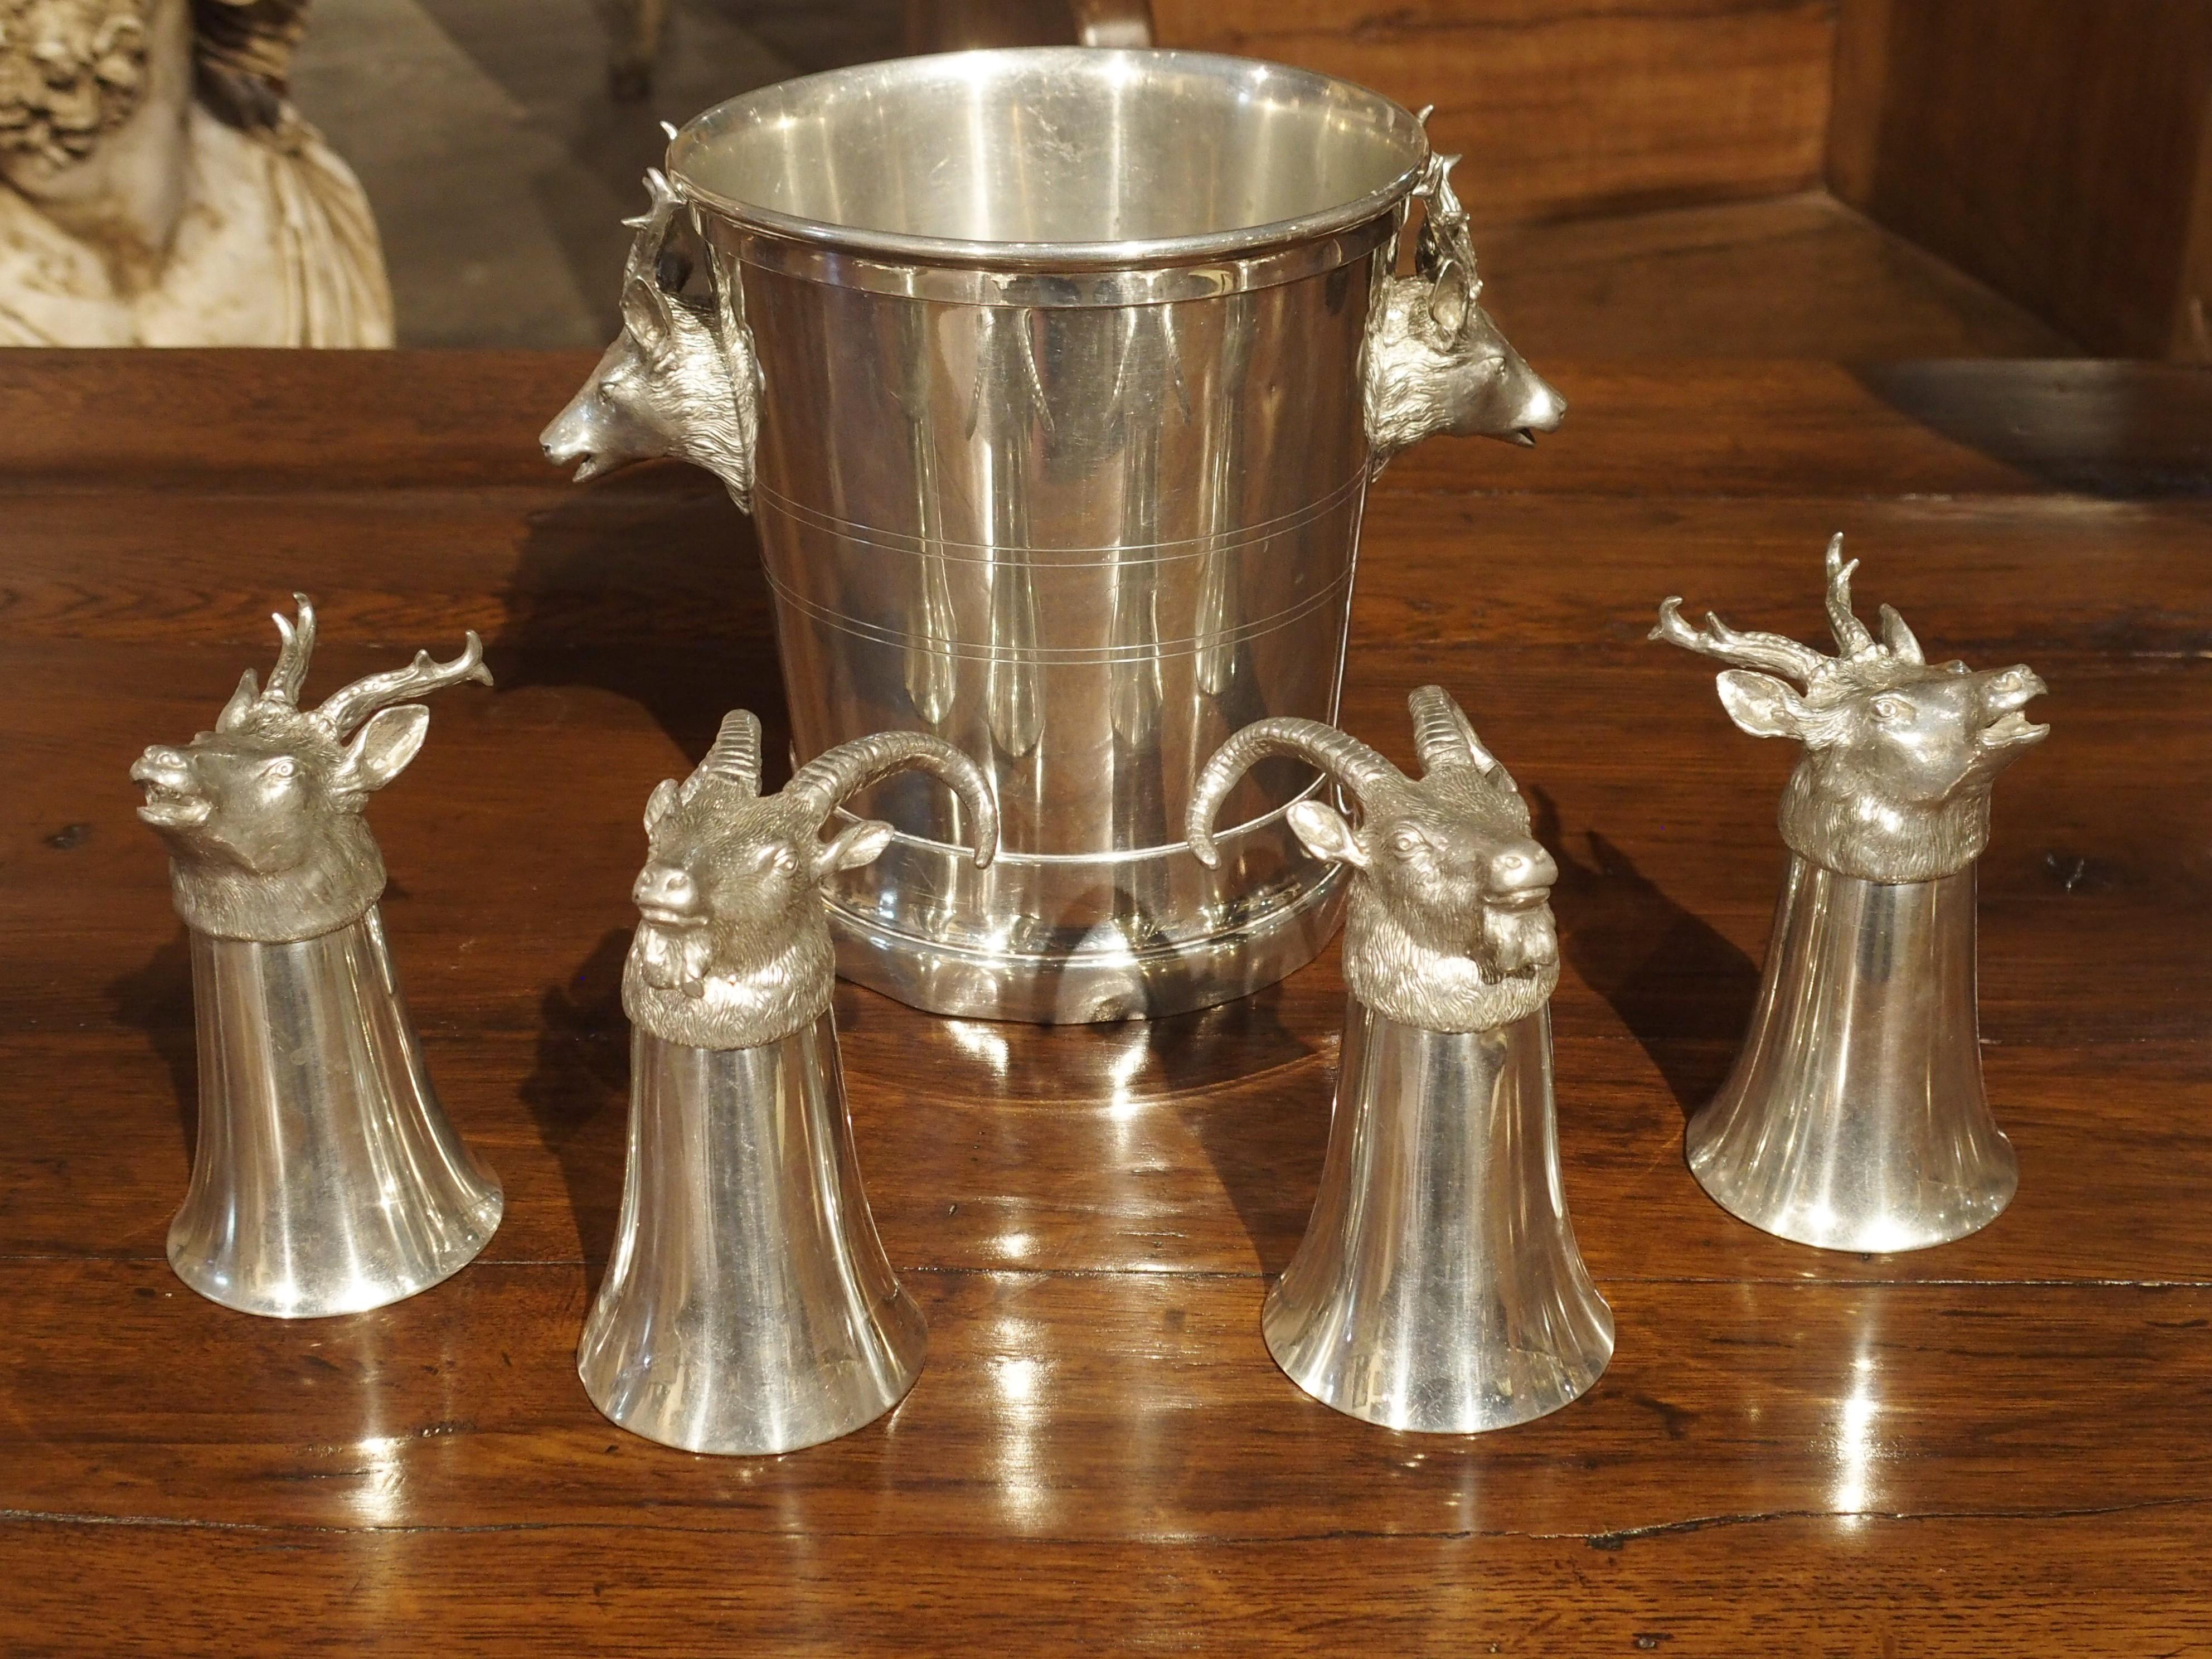 Set of 4 Polished Pewter Stag and Ibex Stirrup Cups with Ice Bucket 11